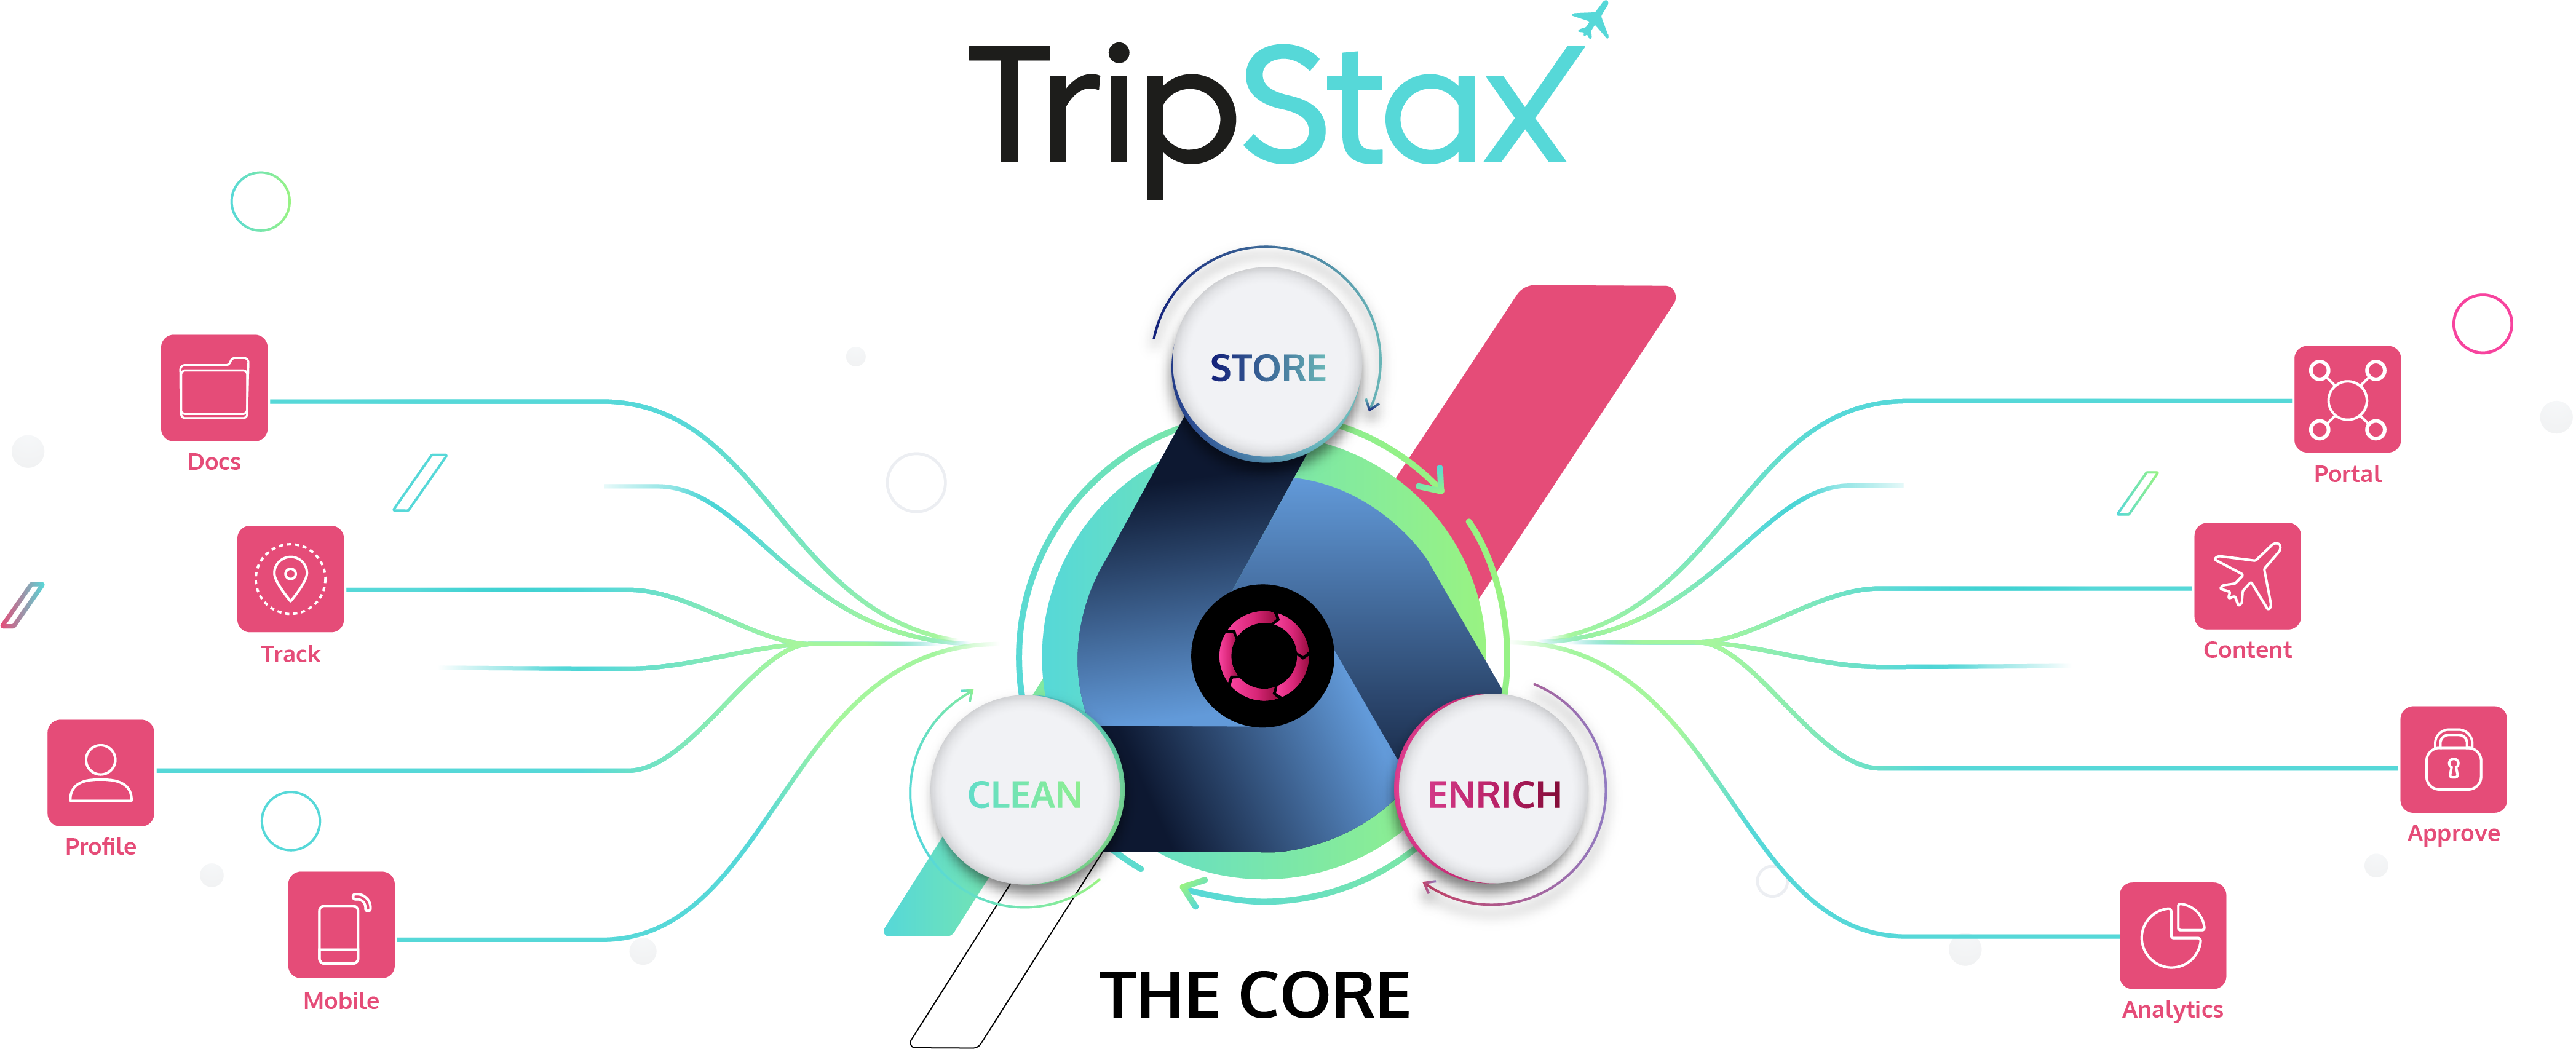 TripStax